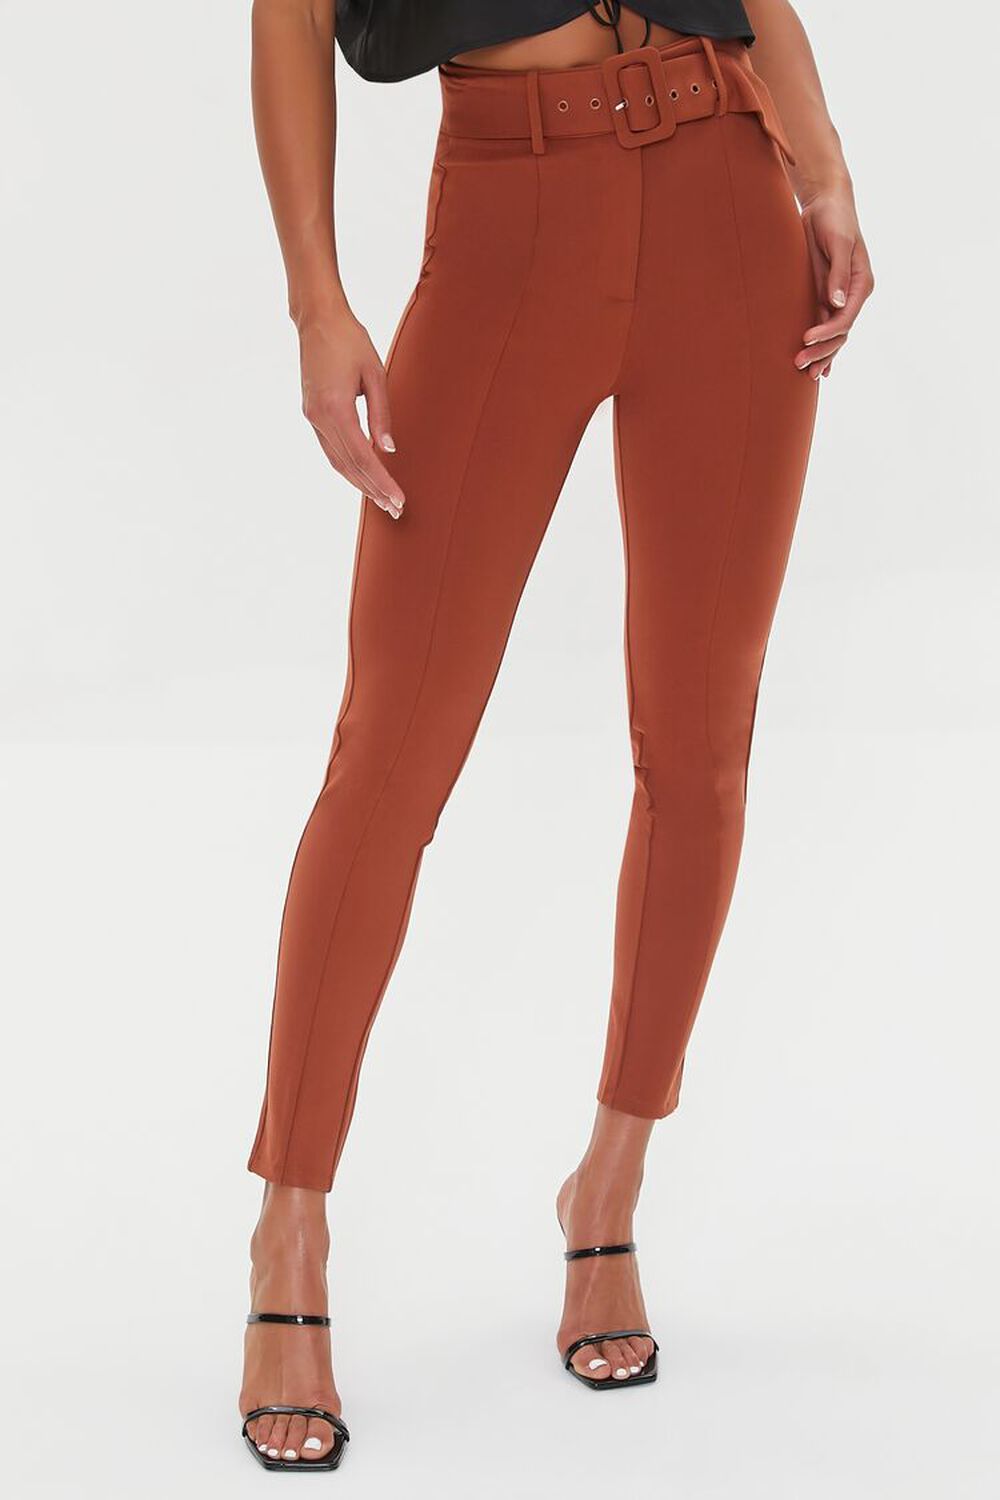 RUST Belted High-Rise Skinny Pants, image 2